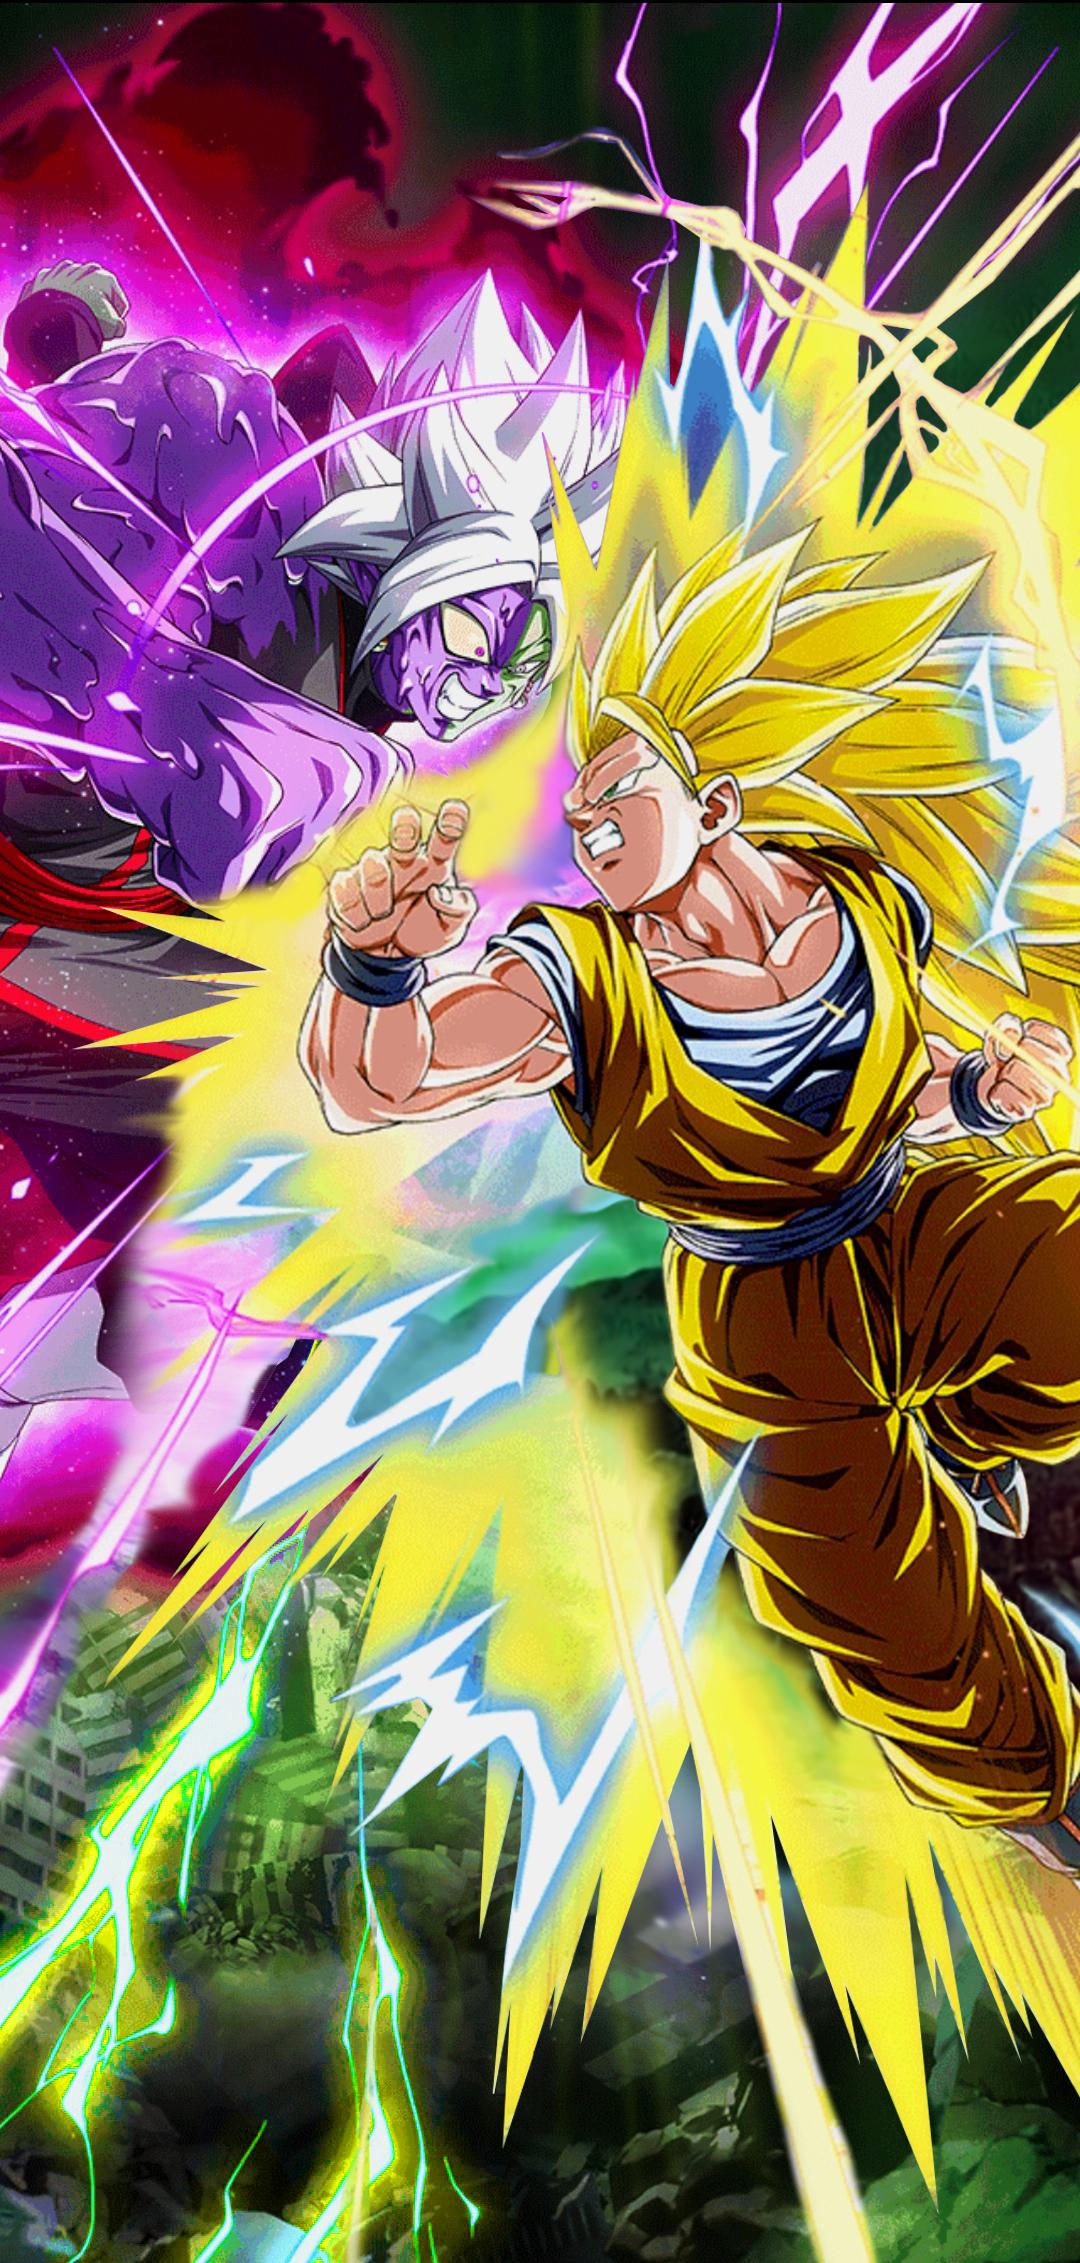 I replaced the Super Saiyan 3 Goku from the Kid Buu Wallpaper with the Blue Vegito from the Zamasu Wallpaper